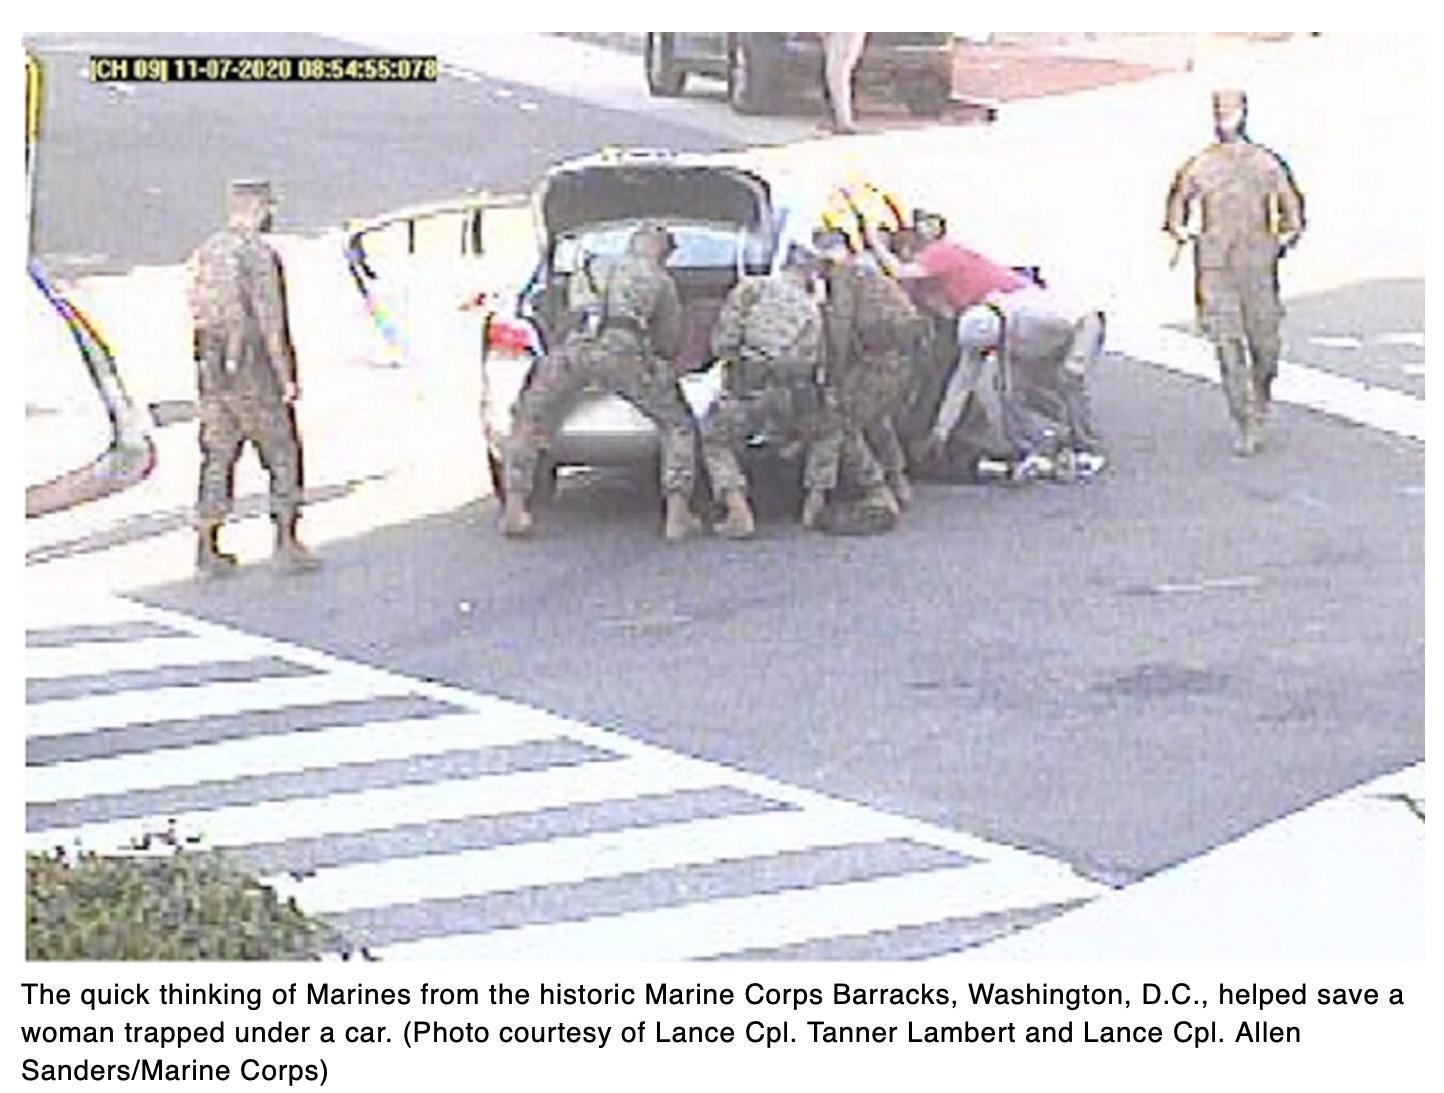  Marines awarded by DC fire department for saving woman trapped under car